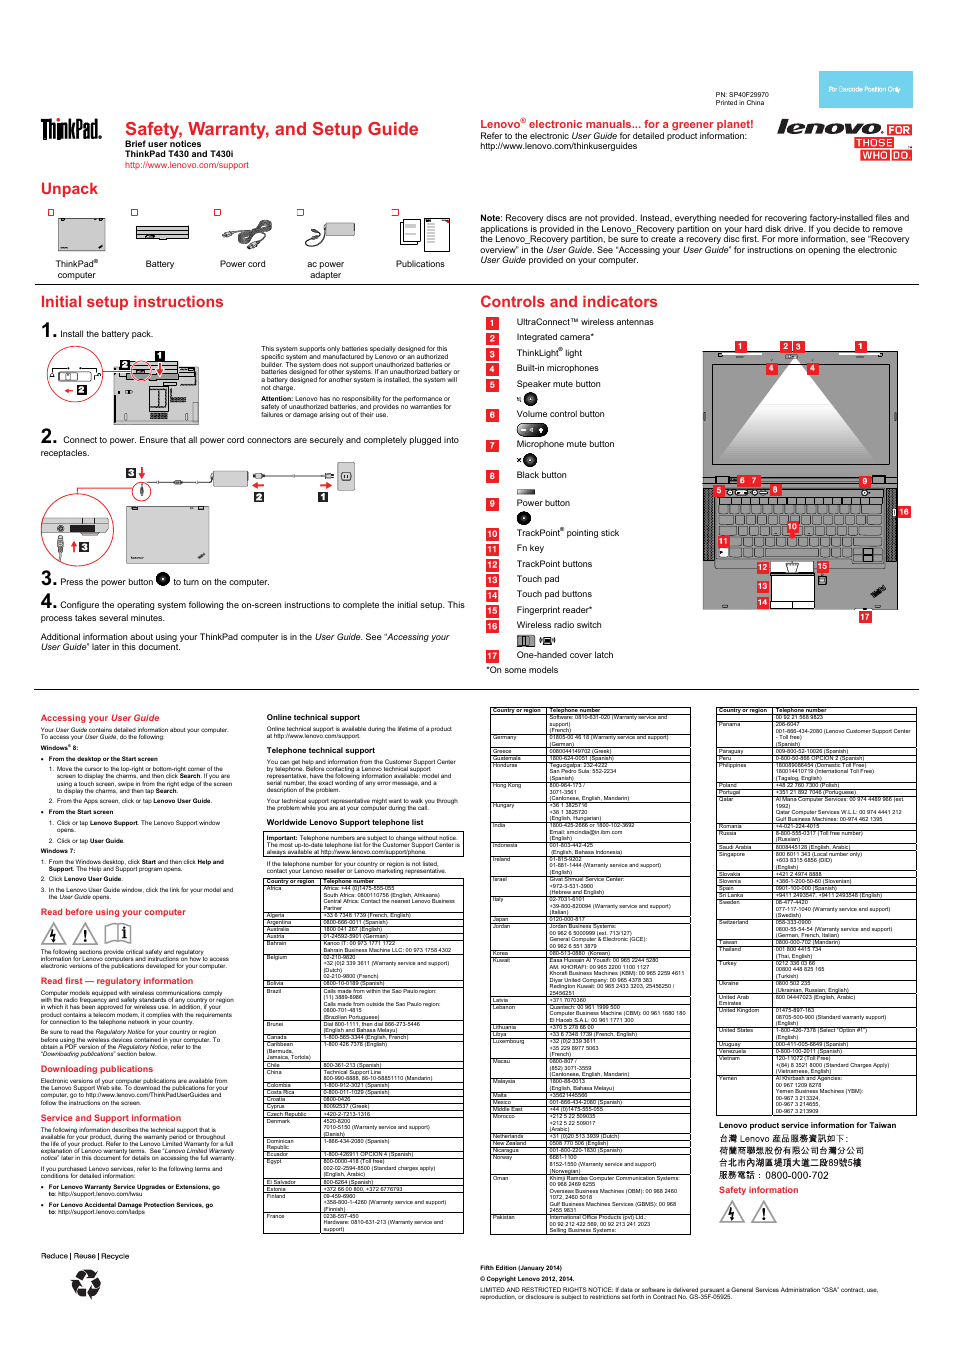 Lenovo ThinkPad T430 User Manual | 2 pages | Also for: ThinkPad T430i